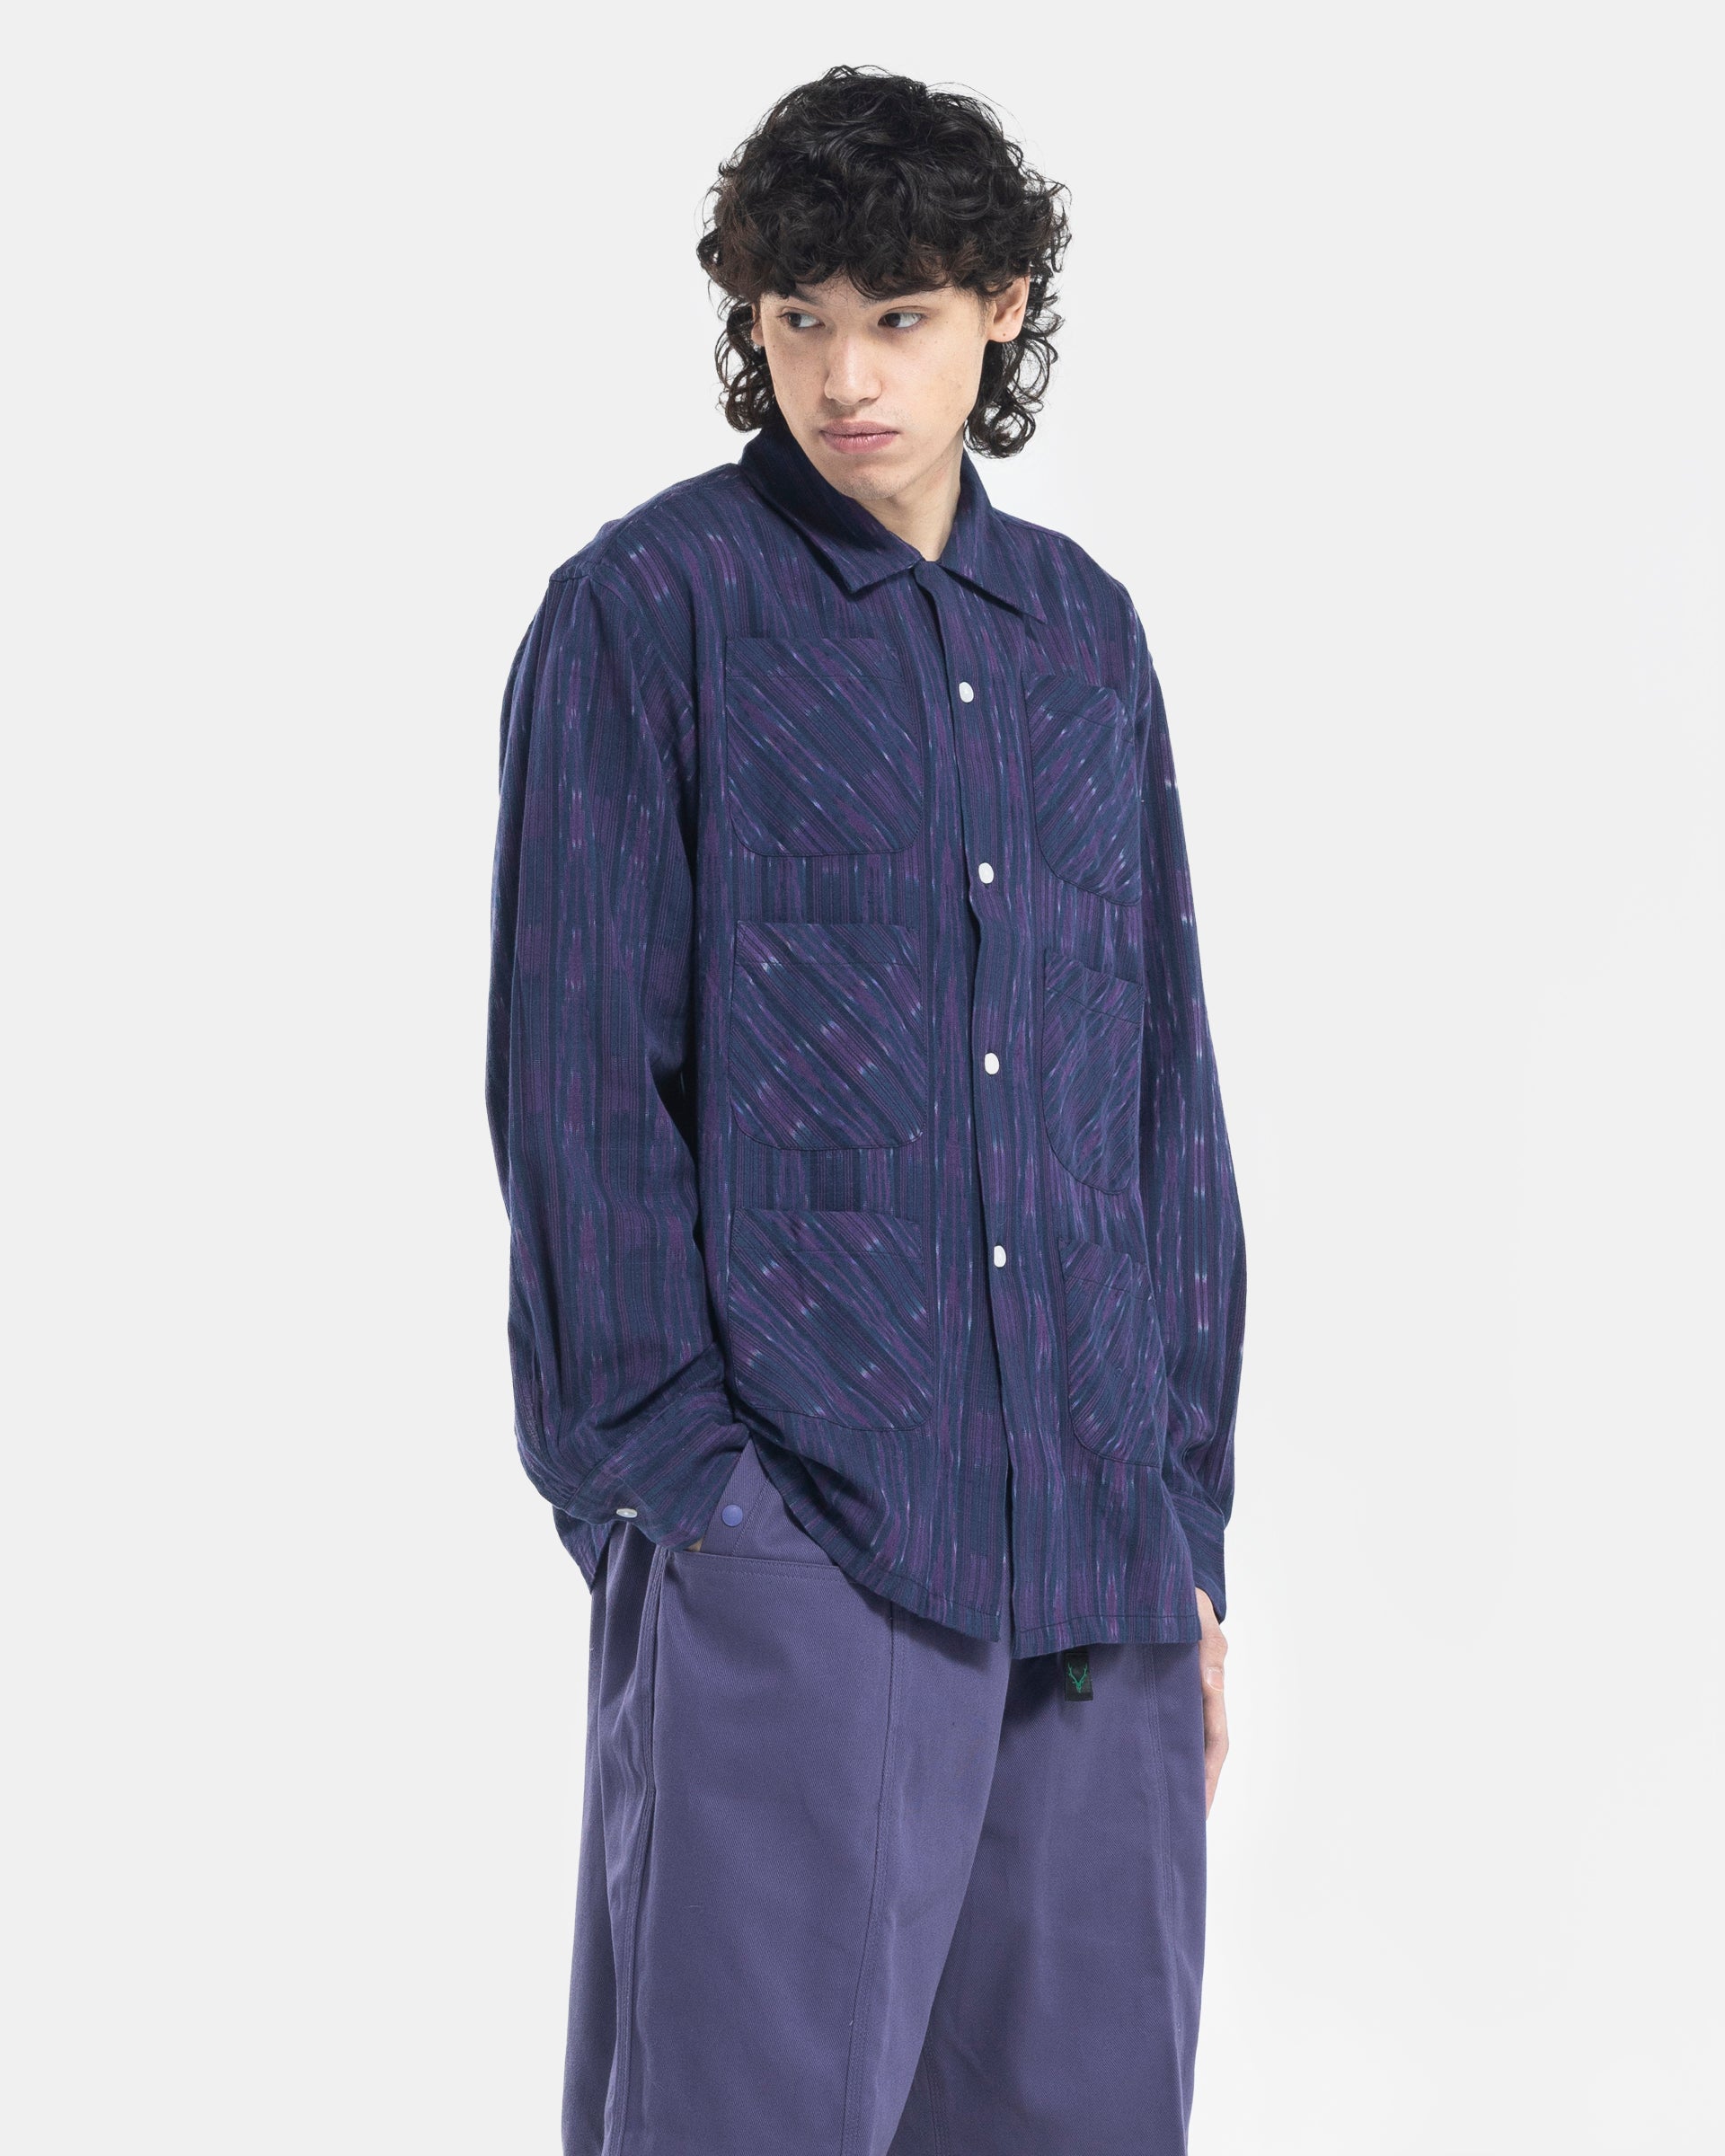 6 Pocket Shirt in Navy and Purple